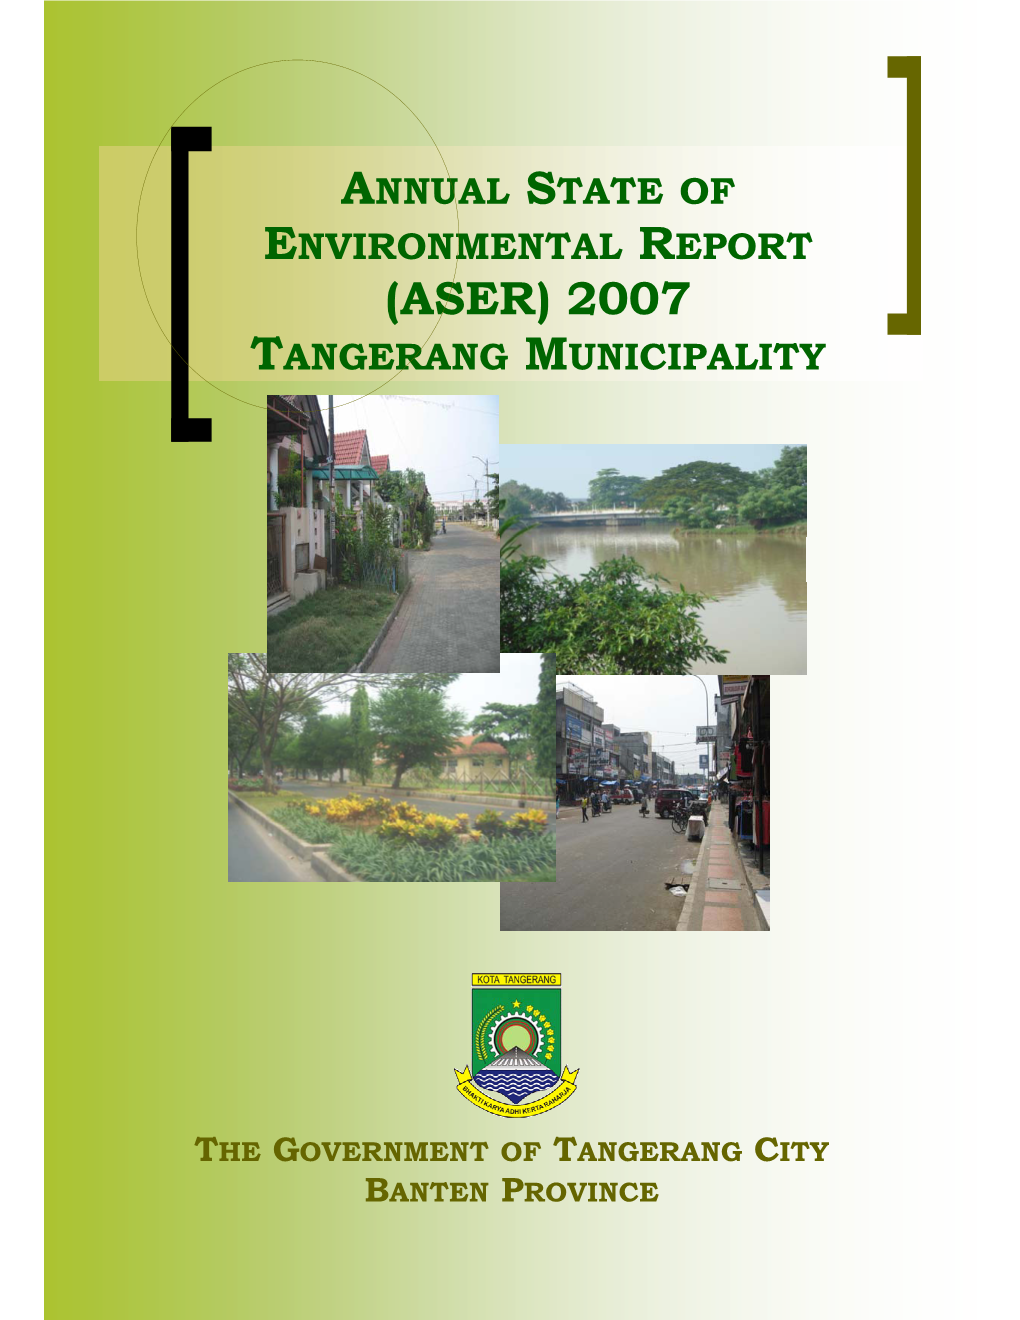 Annual State of Environmental Report (Aser) 2007 Tangerang Municipality